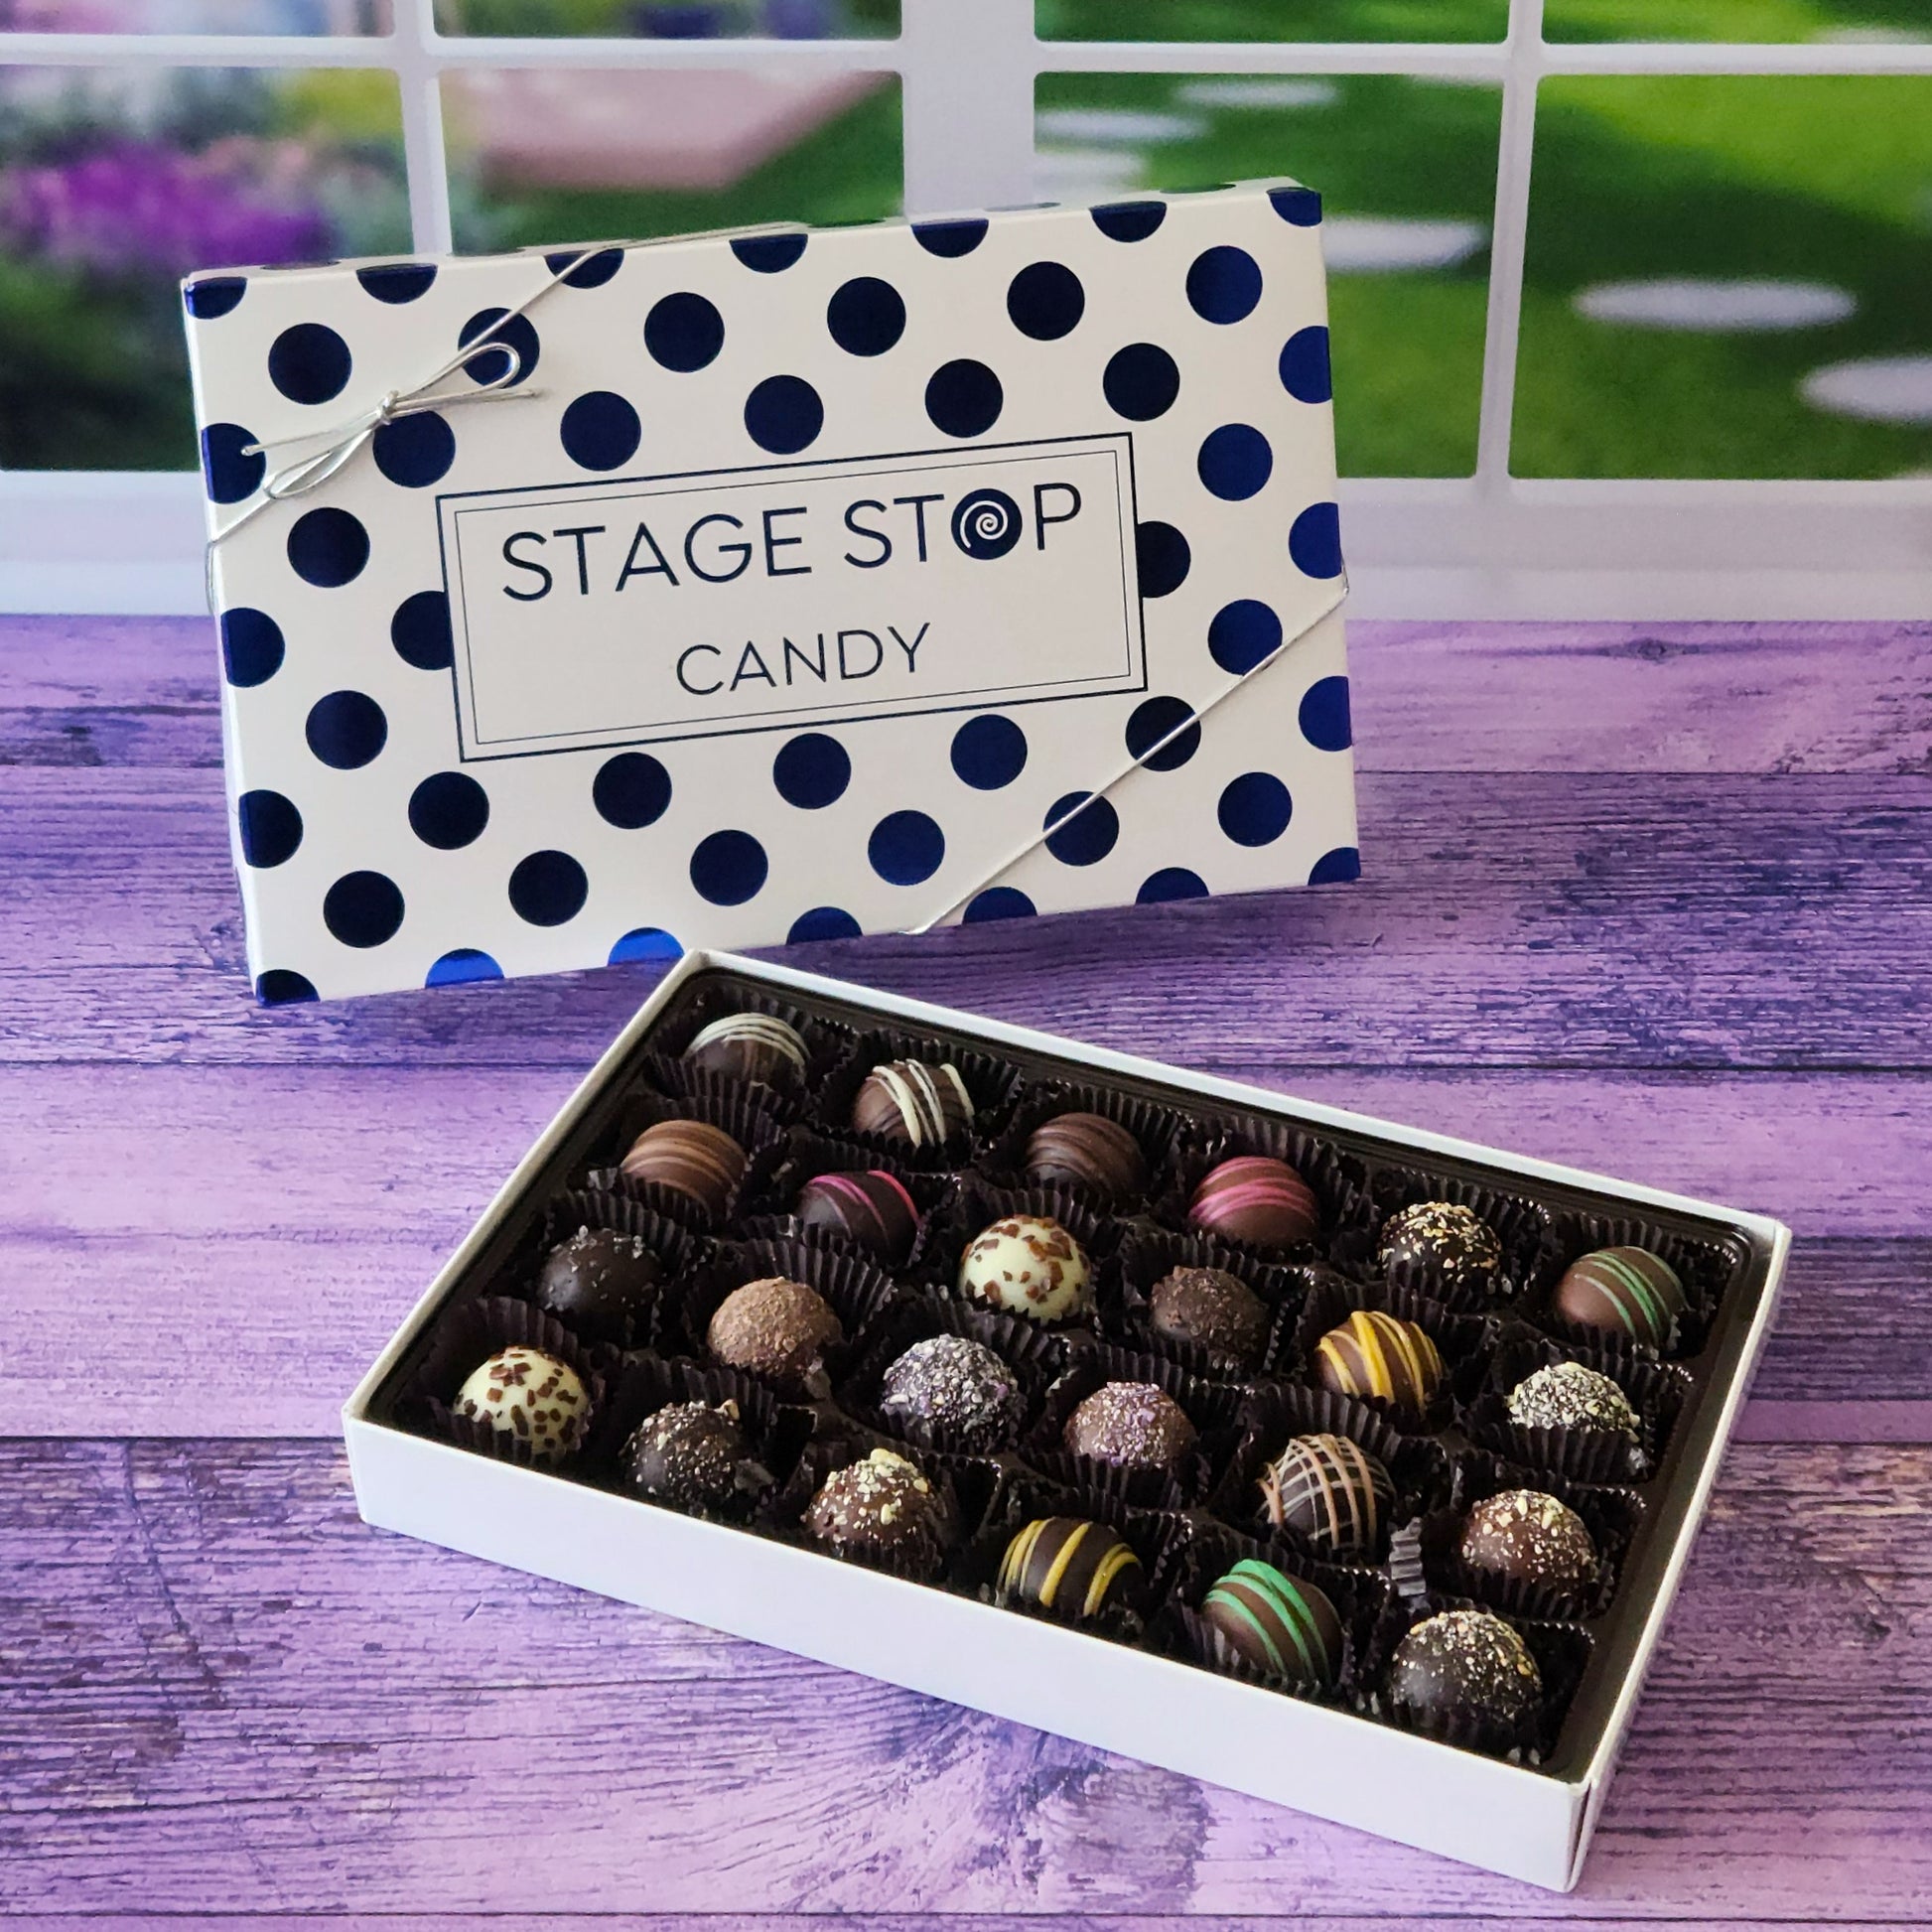 Choose all your favorite truffle flavors in this 24 piece candy box.